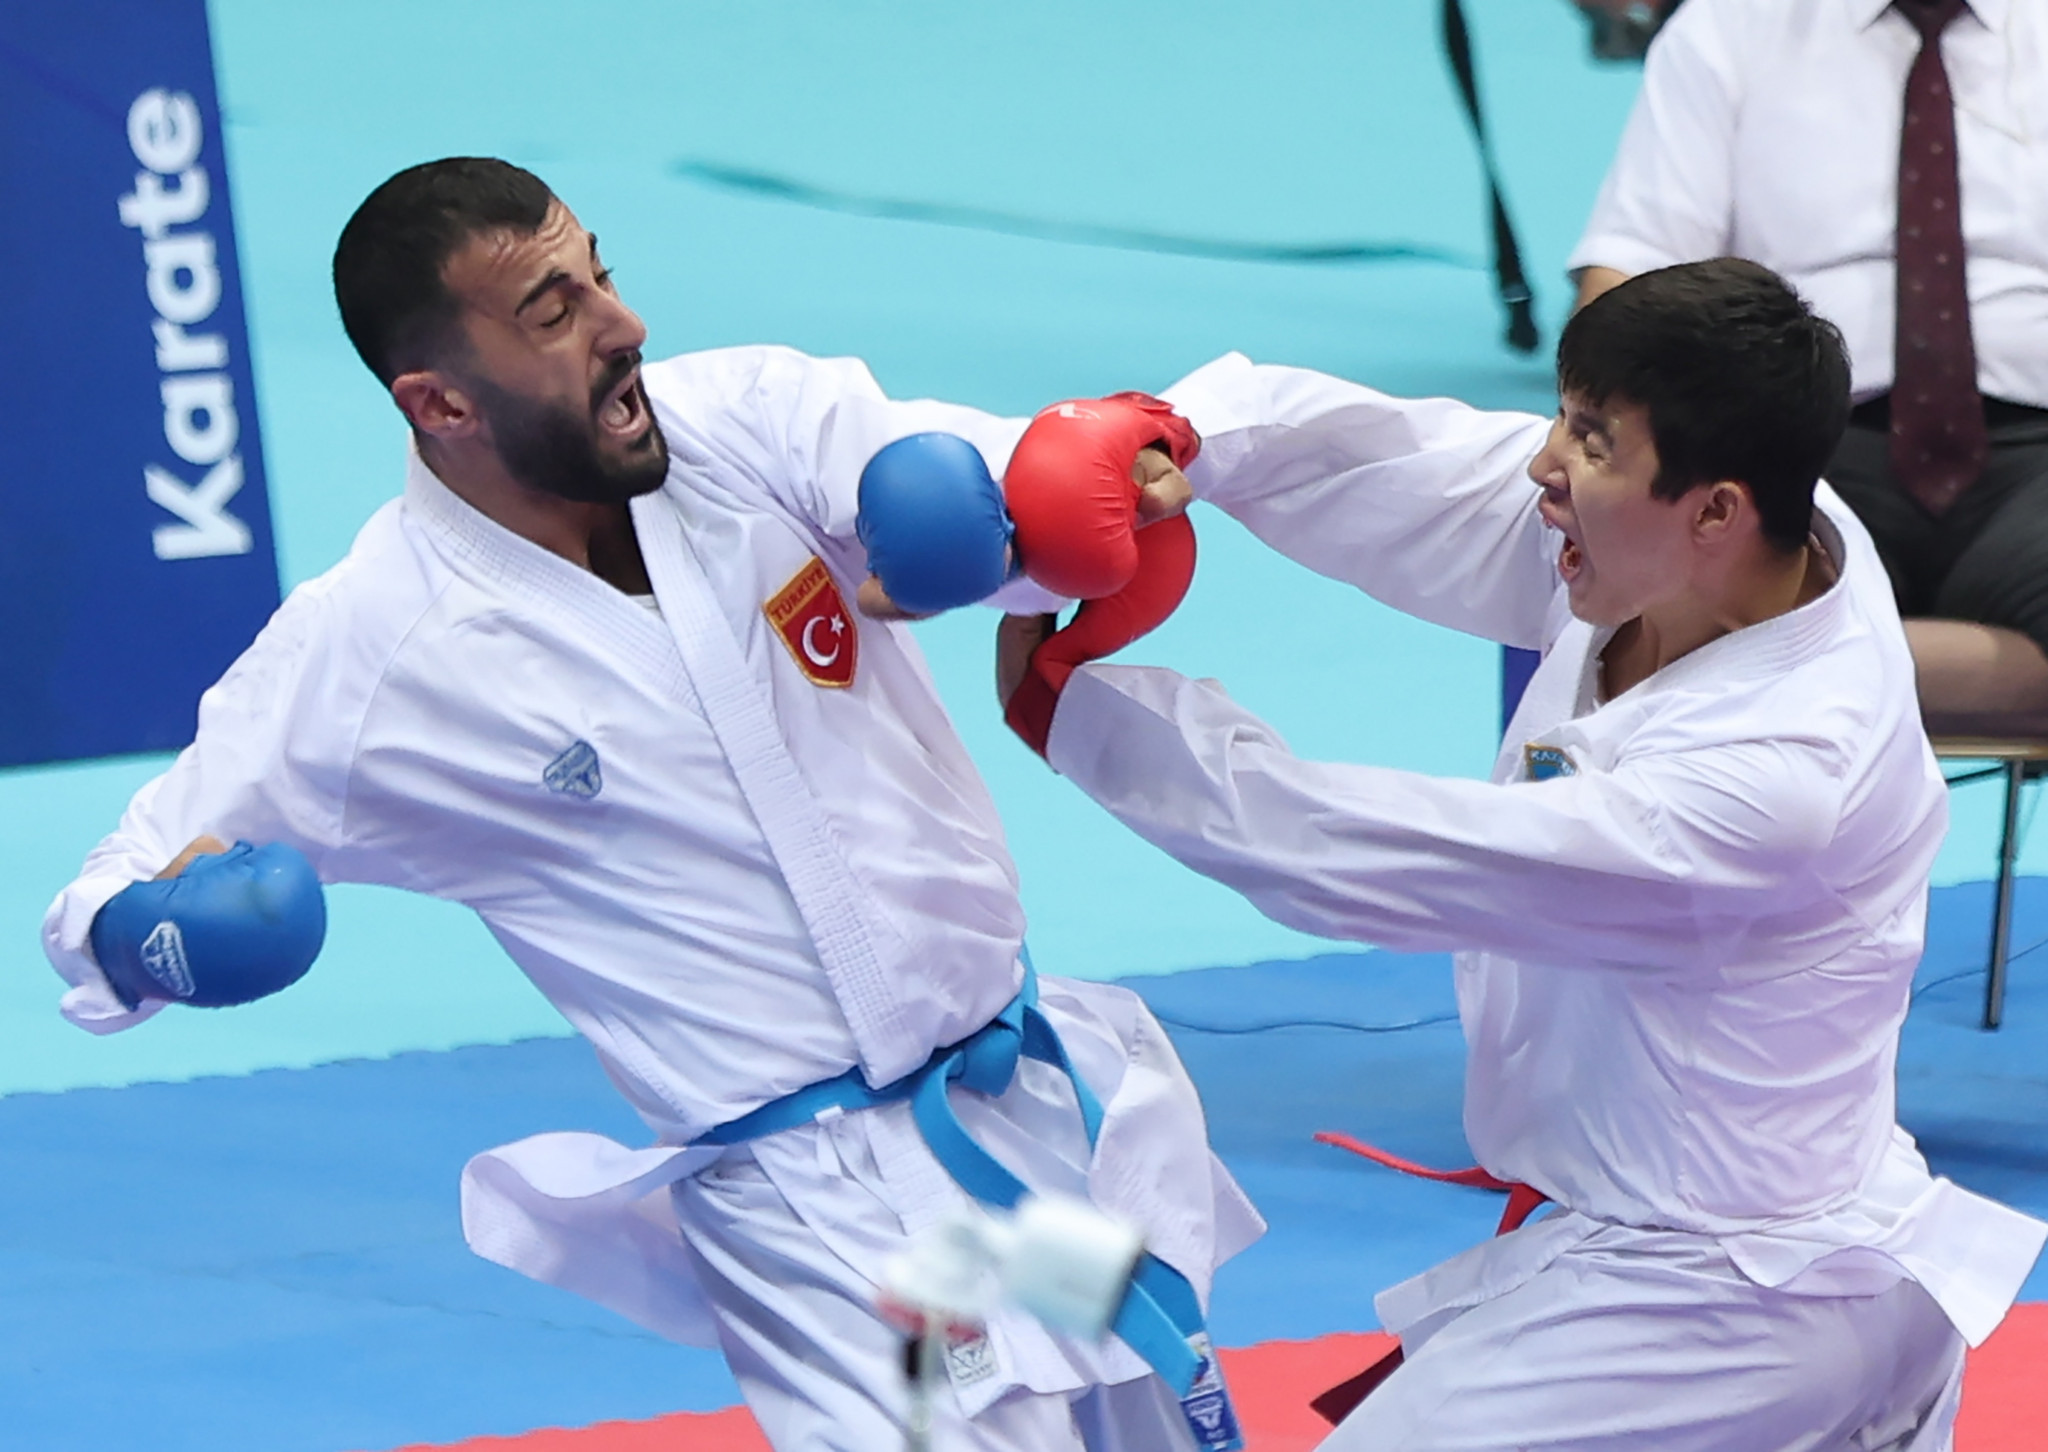 Turkey enjoyed more karate success on the final day of competition ©Konya 2021